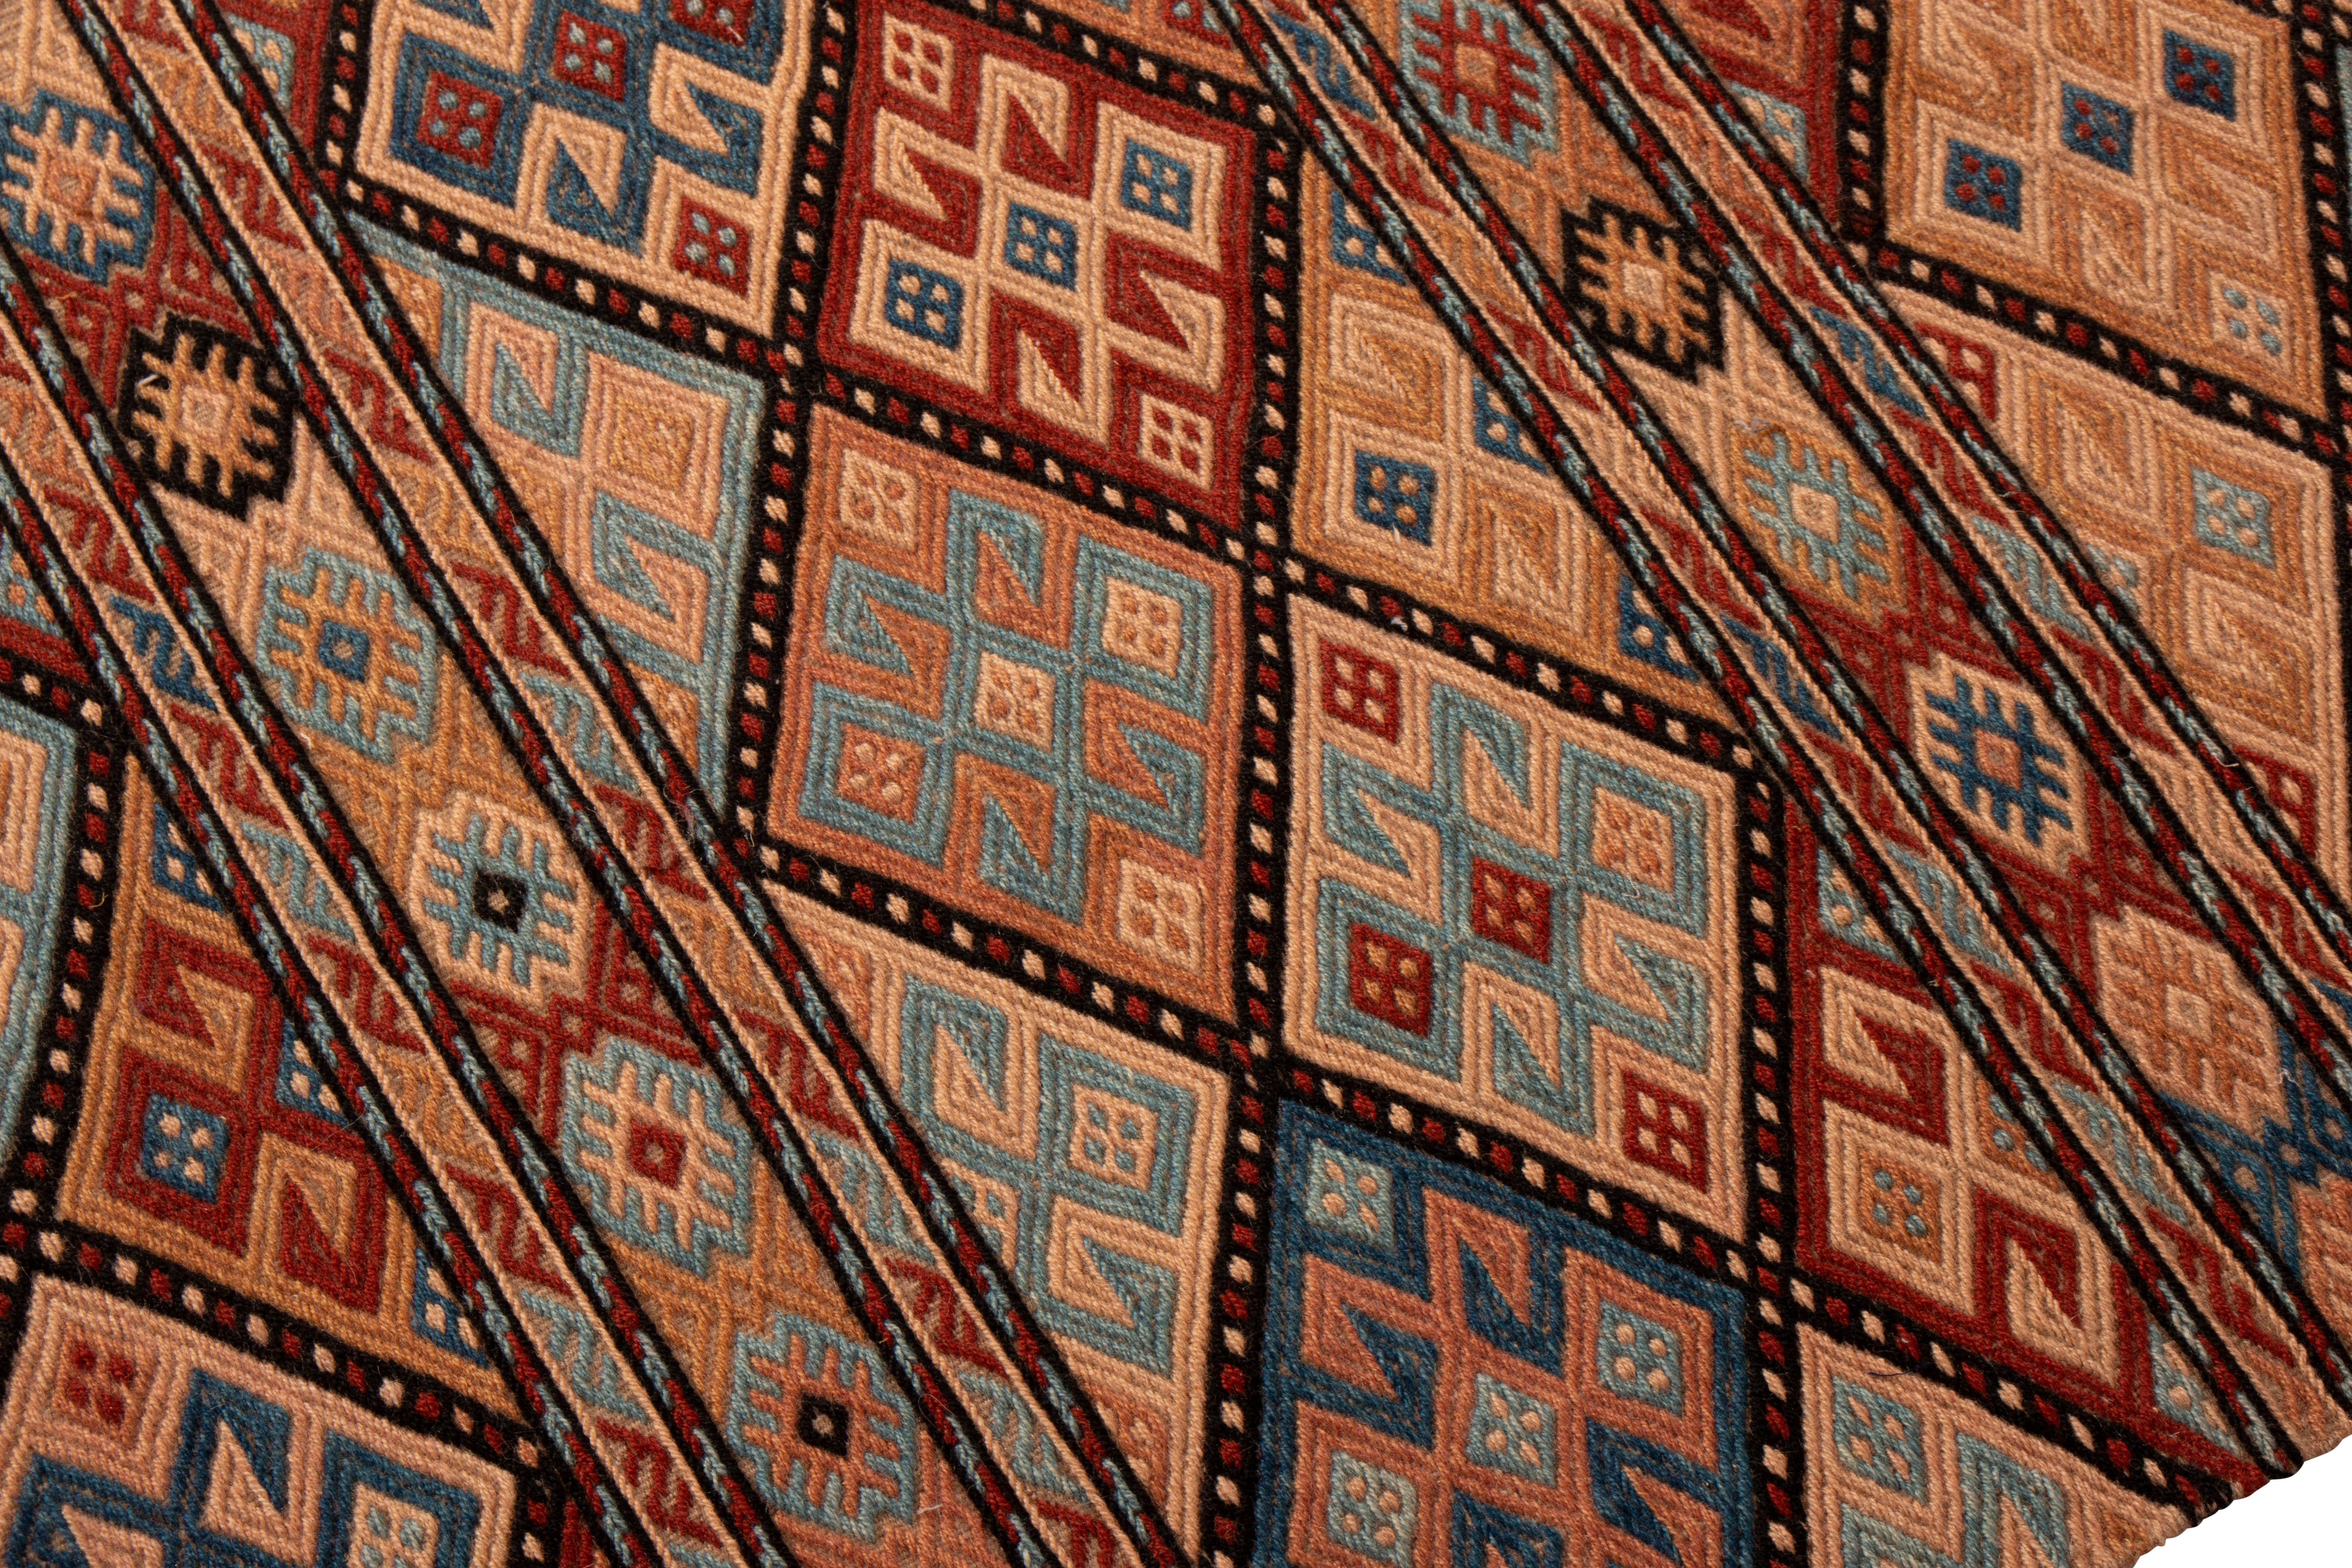 Hand-Woven Contemporary Harput-Style Kilim Blue Camel Geometric All-Over Flat-Weave Runner